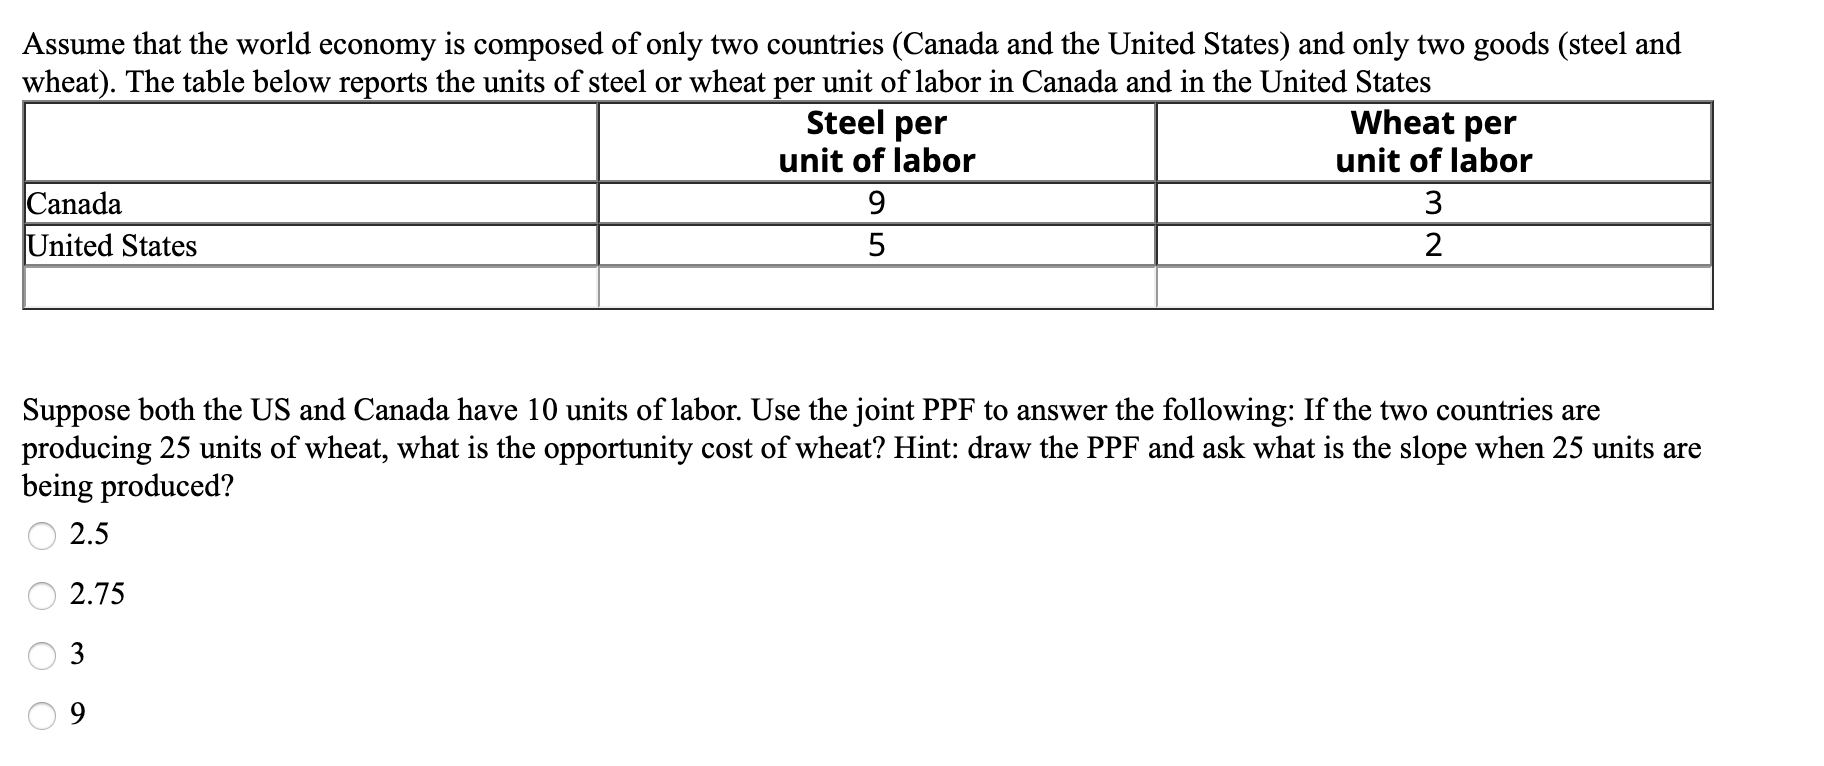 Assume that the world economy is composed of only two countries (Canada and the United States) and only two goods (steel and
wheat). The table below reports the units of steel or wheat per unit of labor in Canada and in the United States
Steel per
Wheat per
unit of labor
unit of labor
Canada
United States
9.
3
Suppose both the US and Canada have 10 units of labor. Use the joint PPF to answer the following: If the two countries are
producing 25 units of wheat, what is the opportunity cost of wheat? Hint: draw the PPF and ask what is the slope when 25 units are
being produced?
2.5
2.75
3
